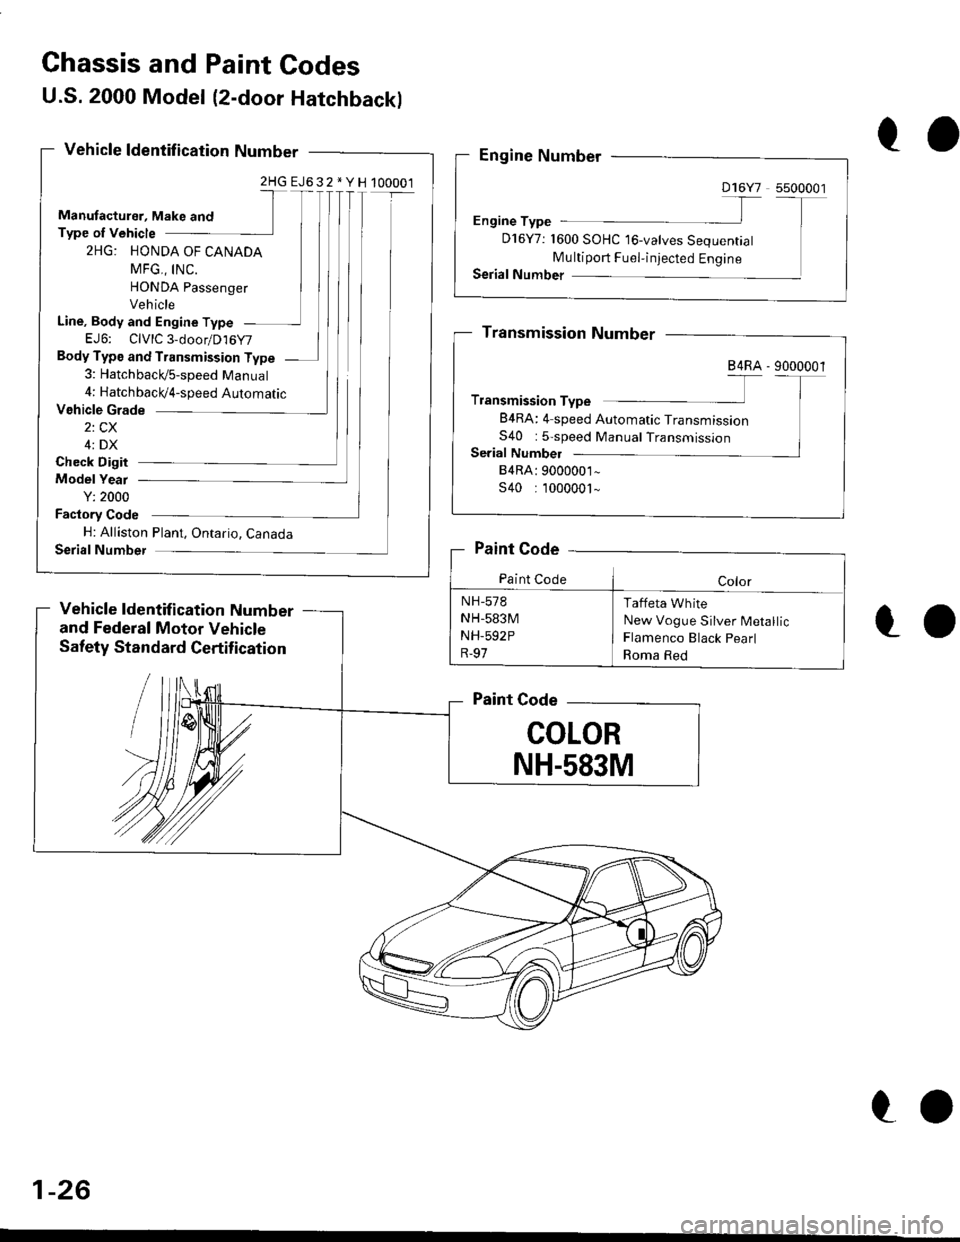 HONDA CIVIC 1996 6.G Owners Manual Chassis and Paint Codes
Vohicle Grade
2: CX
4: DX
Check Digit
Model Yeal
Y: 2000
Fastory Code
H: Alliston Plant, Ontario. Canada
Serial Number
Vehicle ldentification NumbeI
and Federal Motor Vehicle
S